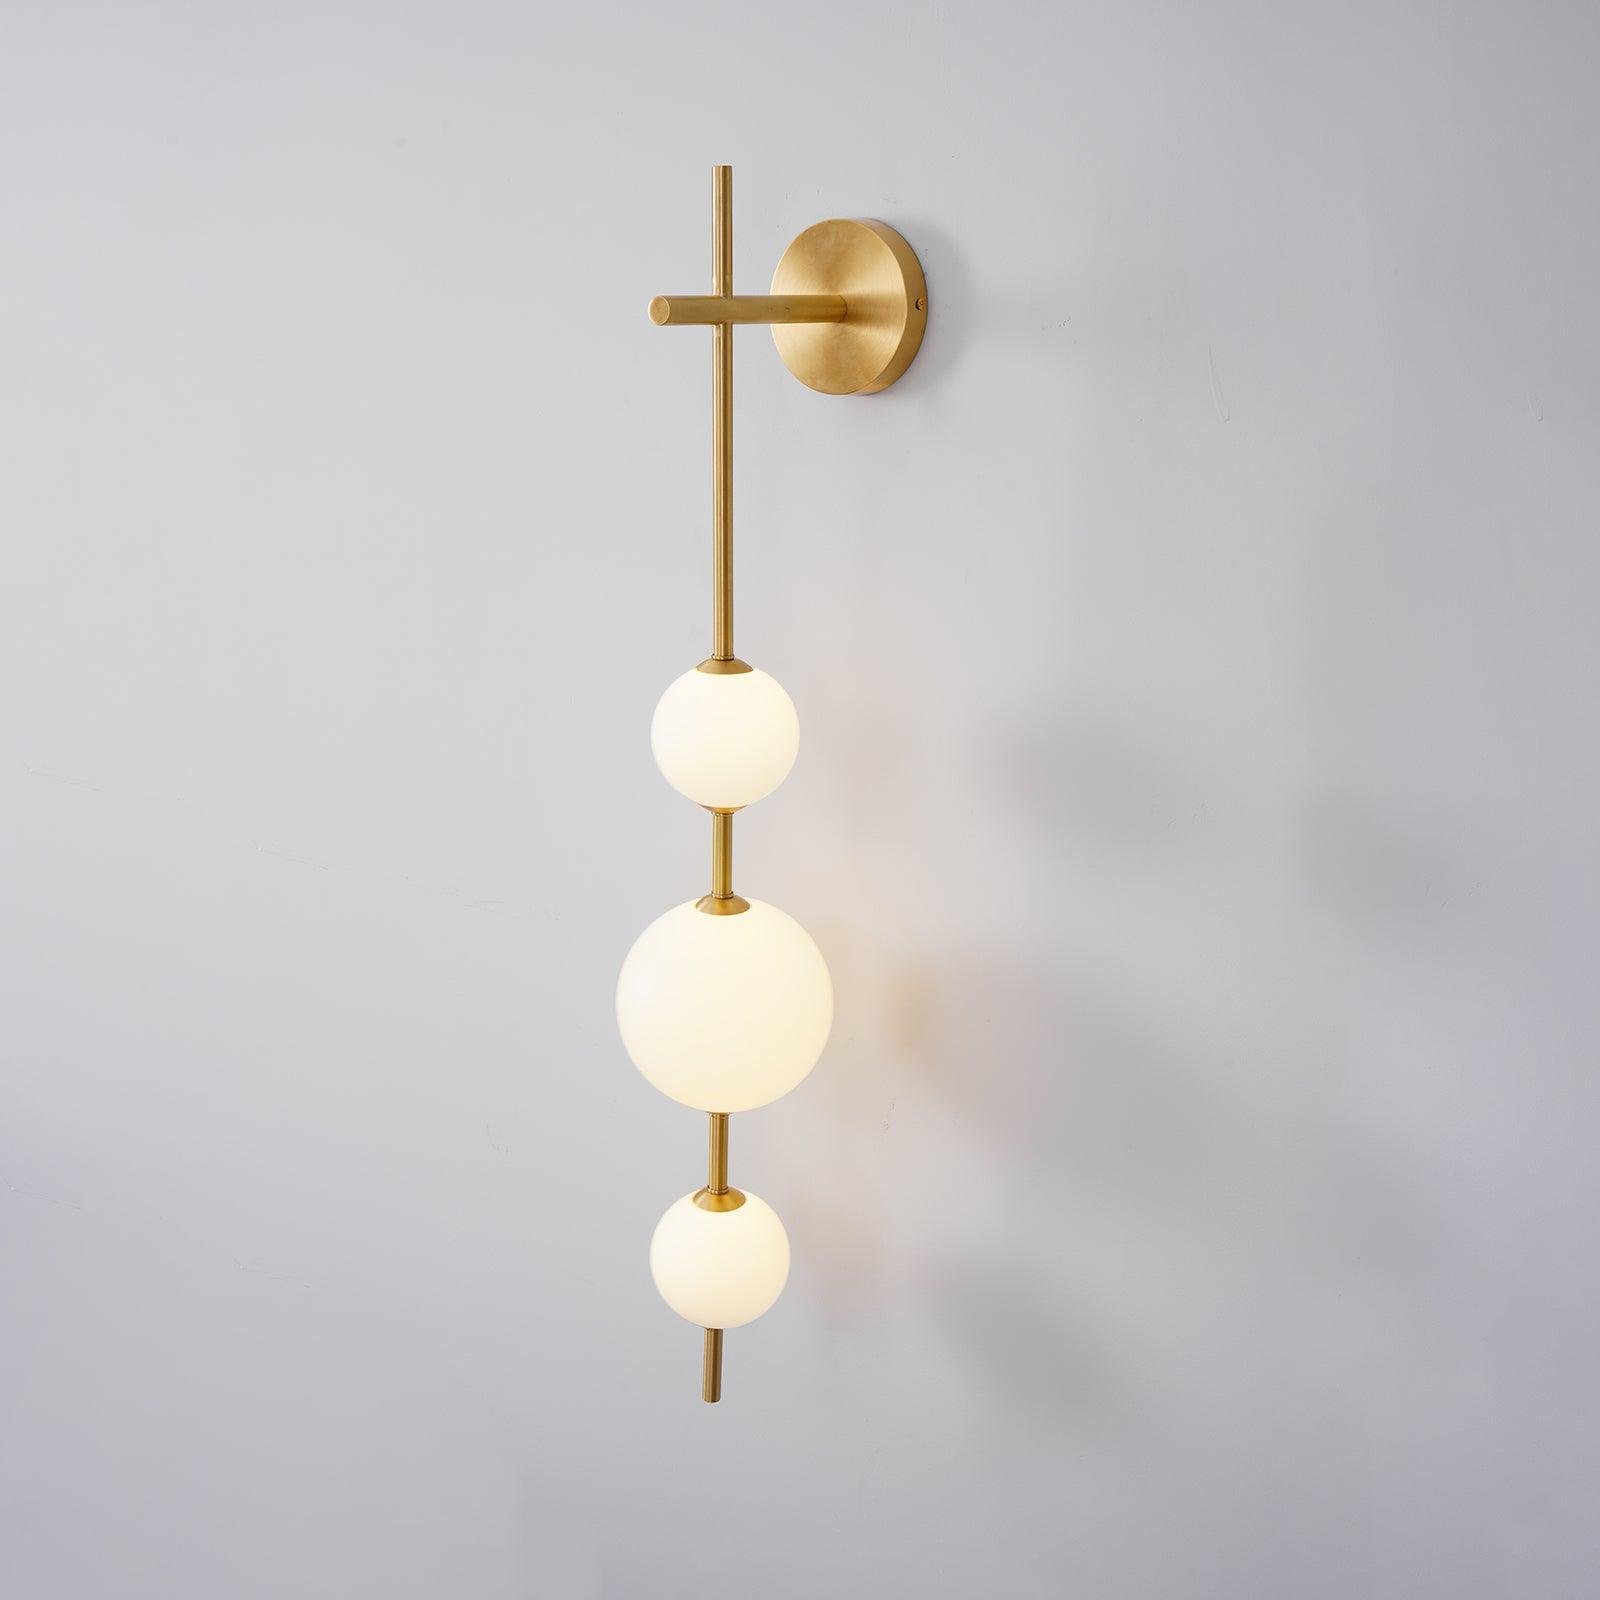 Set of 2 Brass Vertical Globe Wall Lamps, Diameter 15cm x Height 85cm, with Cool White Illumination